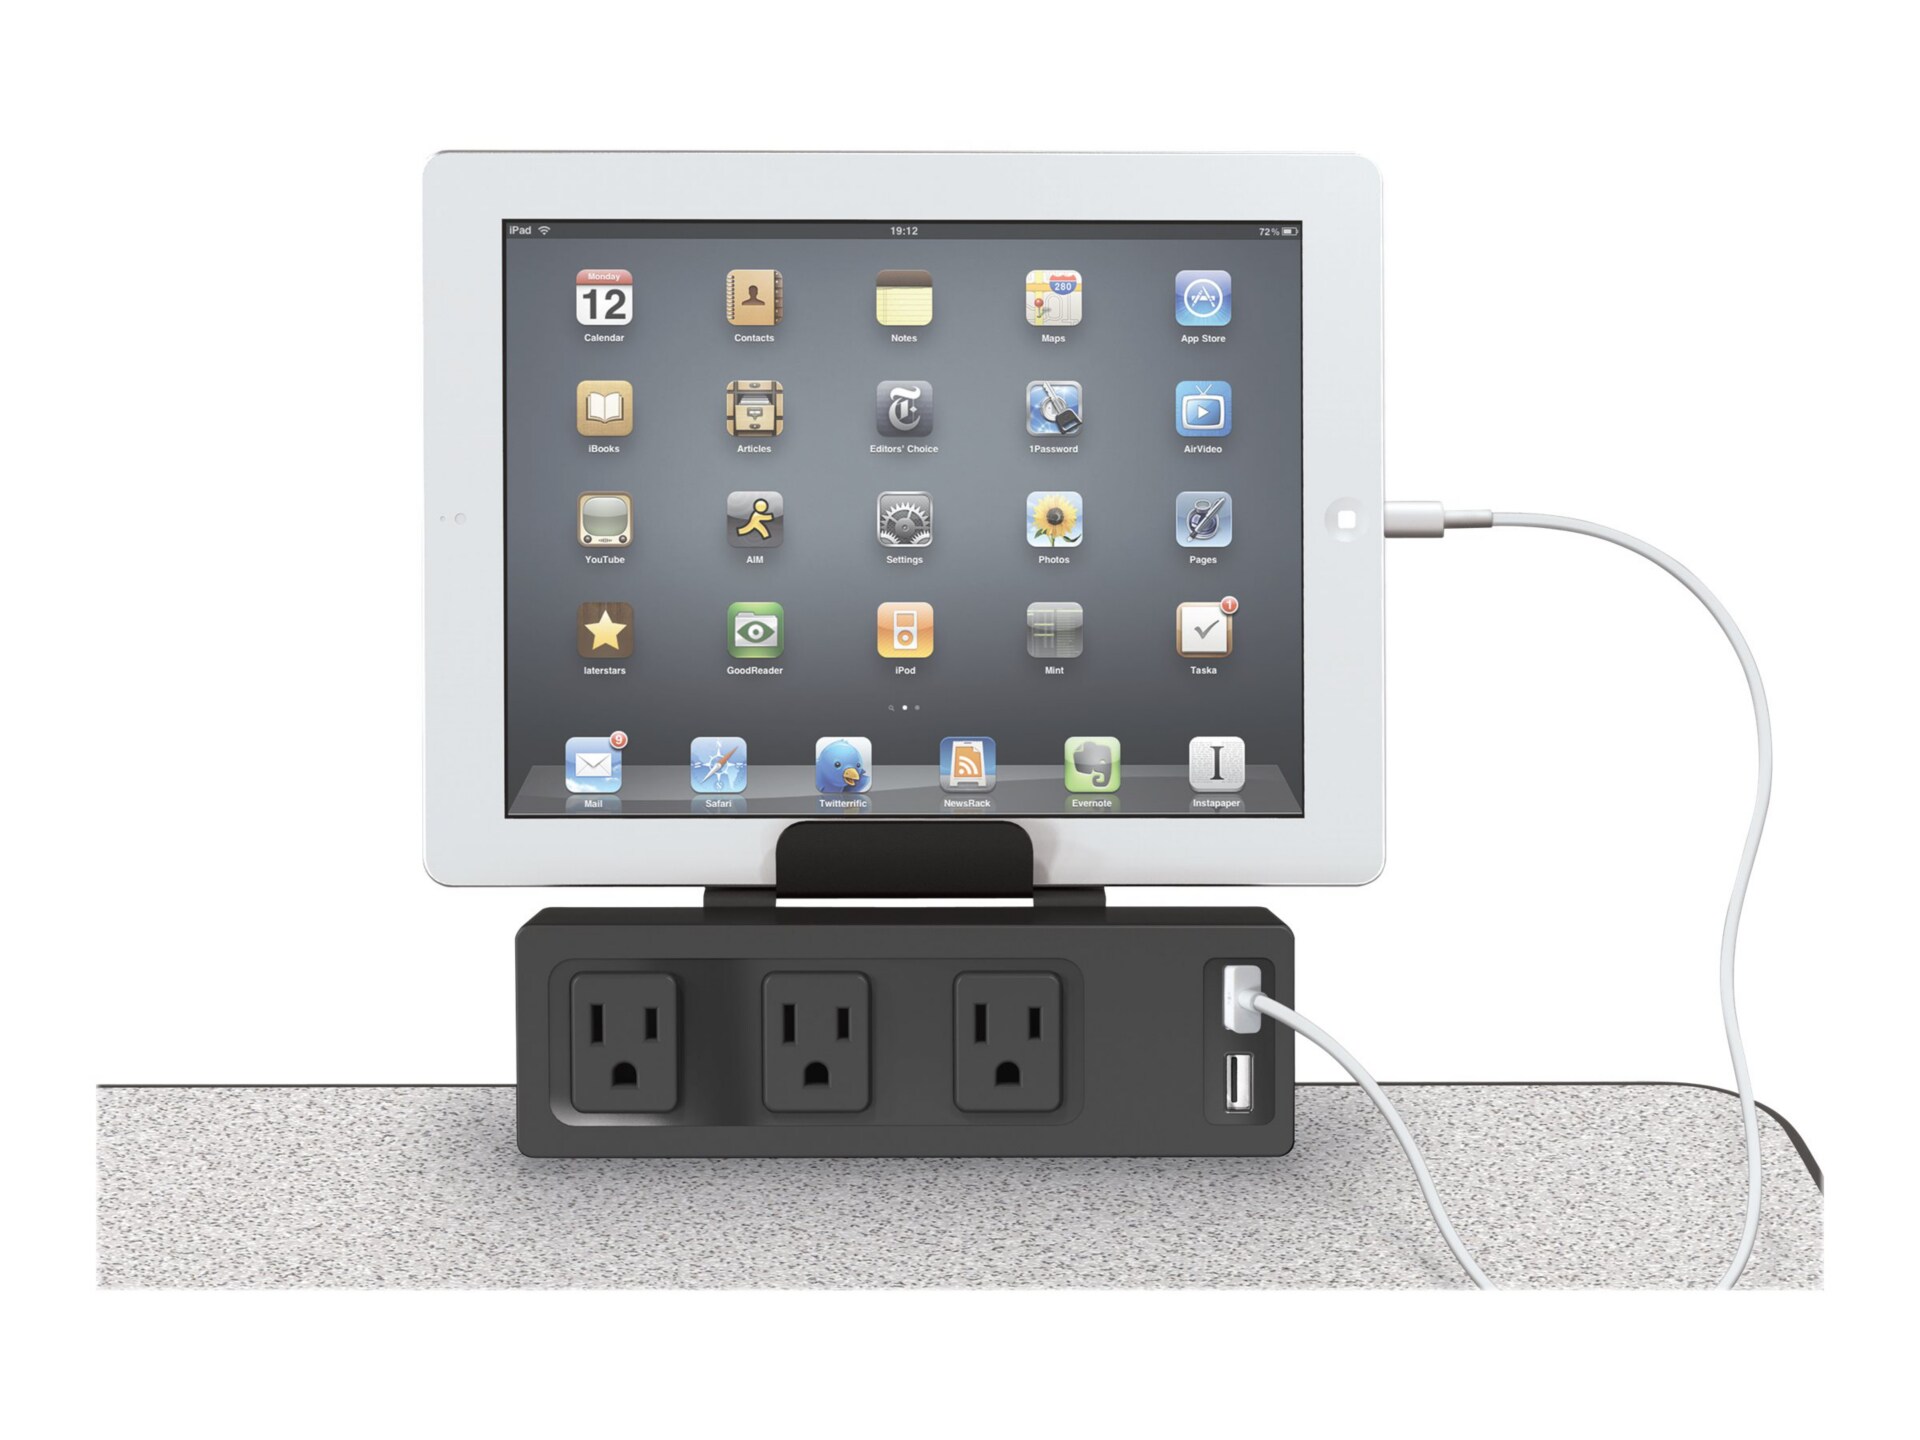 MooreCo Clamp Mount Outlet & USB Charger - power strip